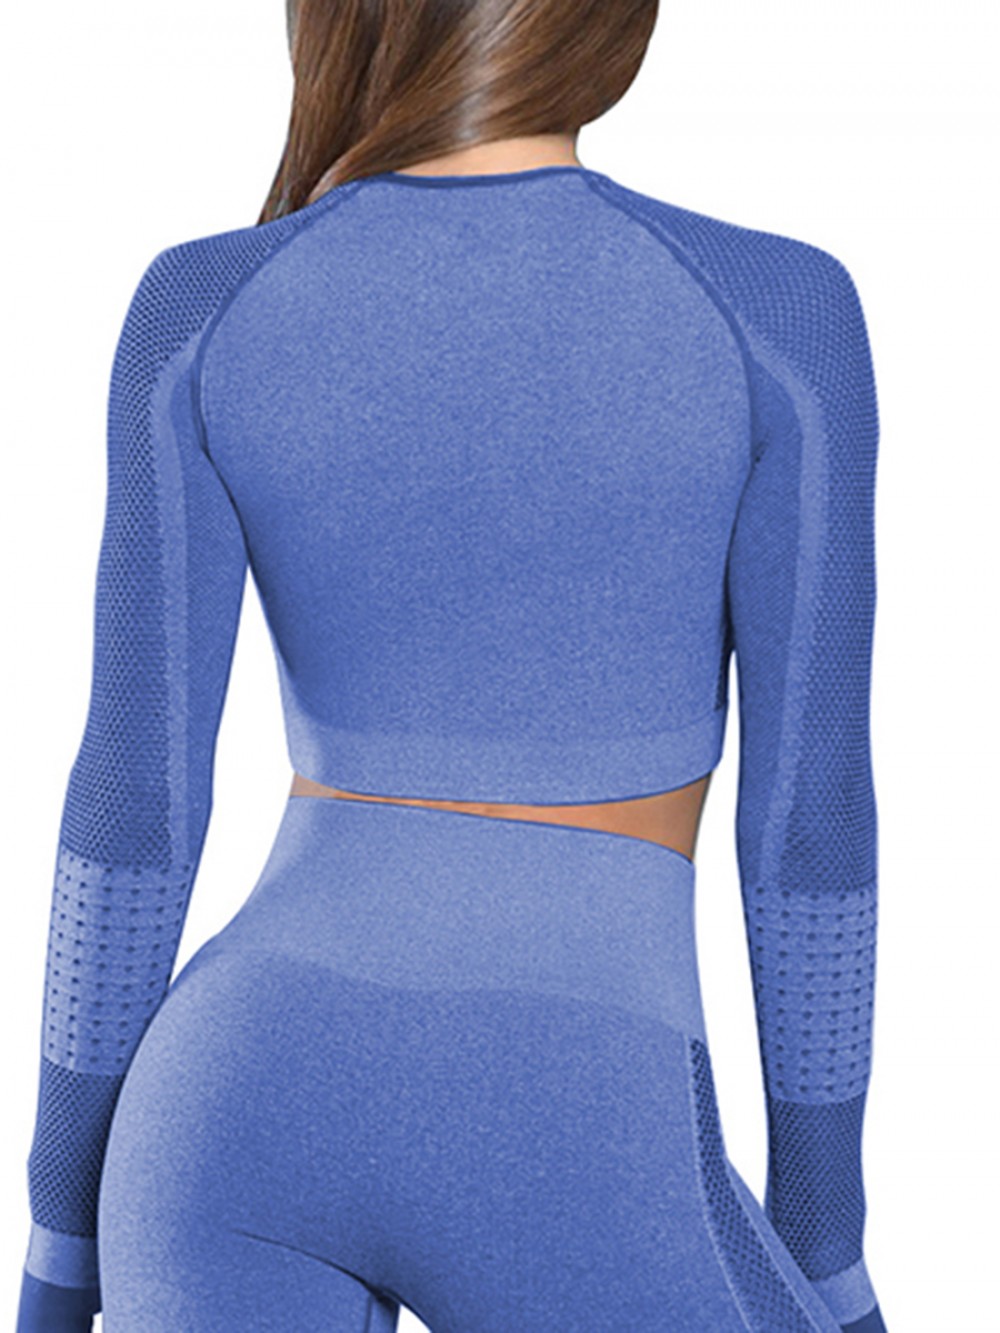 Fitness Royal Blue Full Sleeves Yoga Crop Top Thumbhole Quick Drying